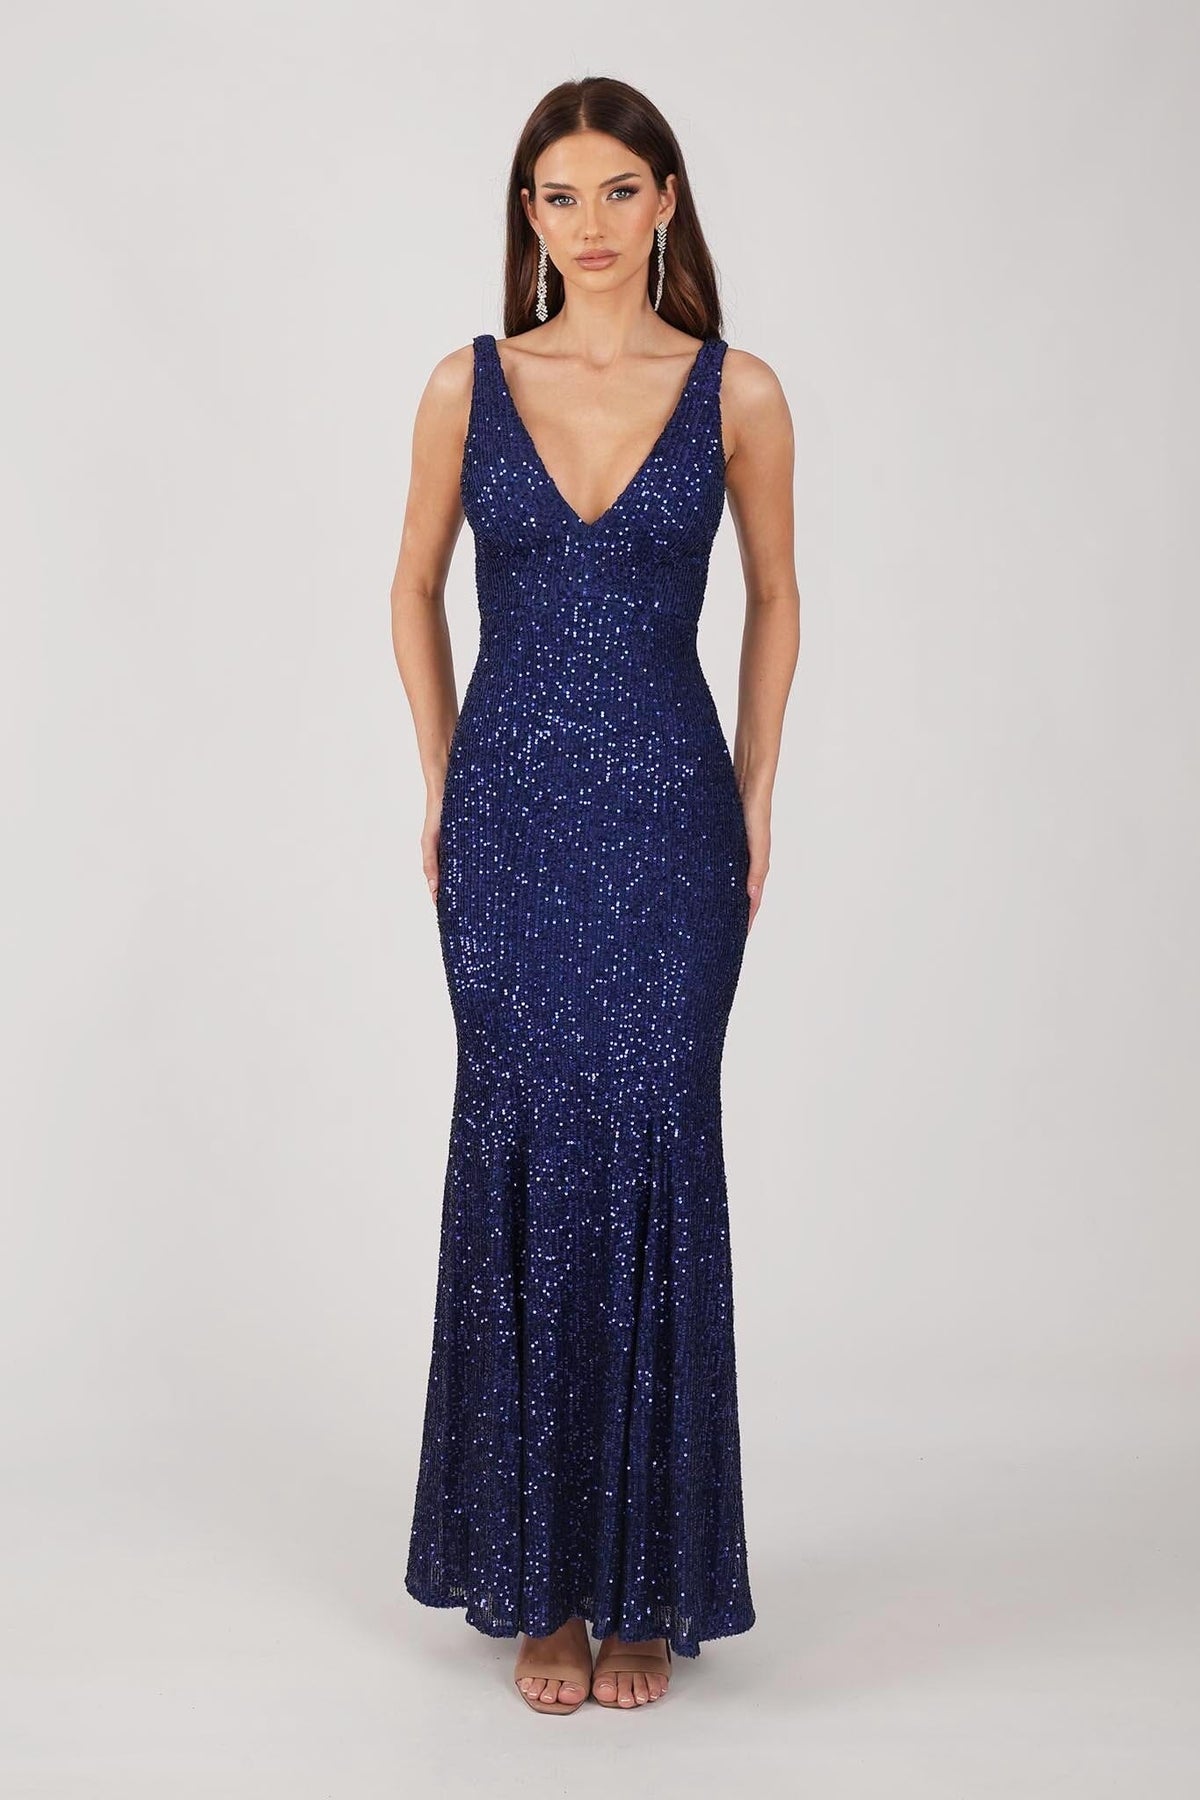 Navy Blue Fitted Sequin Evening Gown with Deep V Neckline